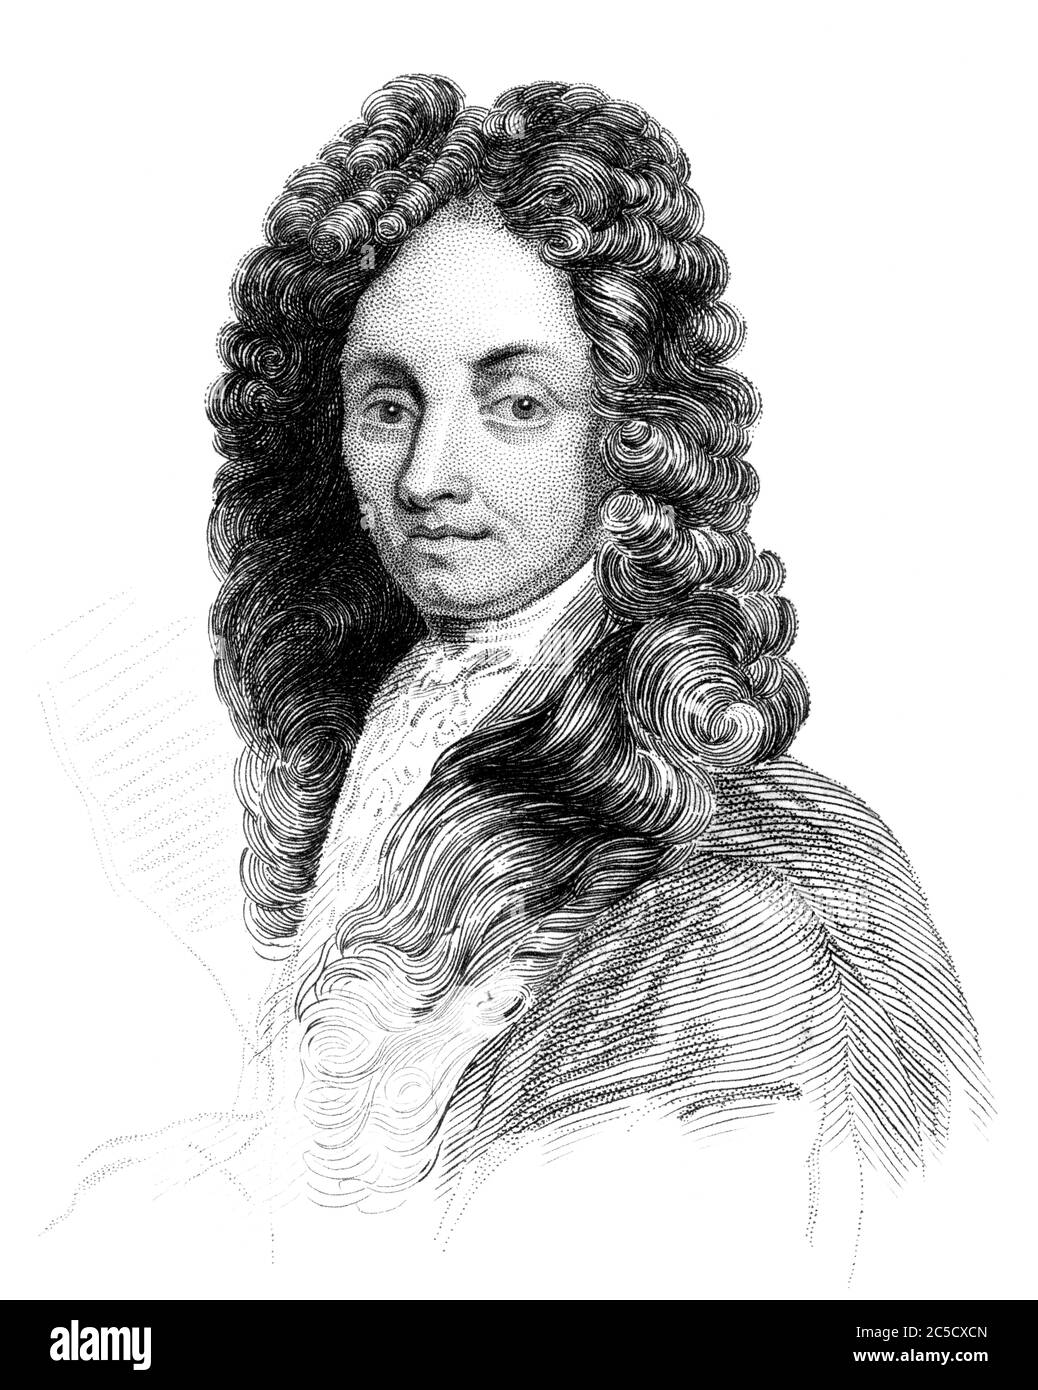 An engraved vintage illustration portrait image of Sir Christopher Wren from a Victorian book dated 1847 that is no longer in copyright Stock Photo